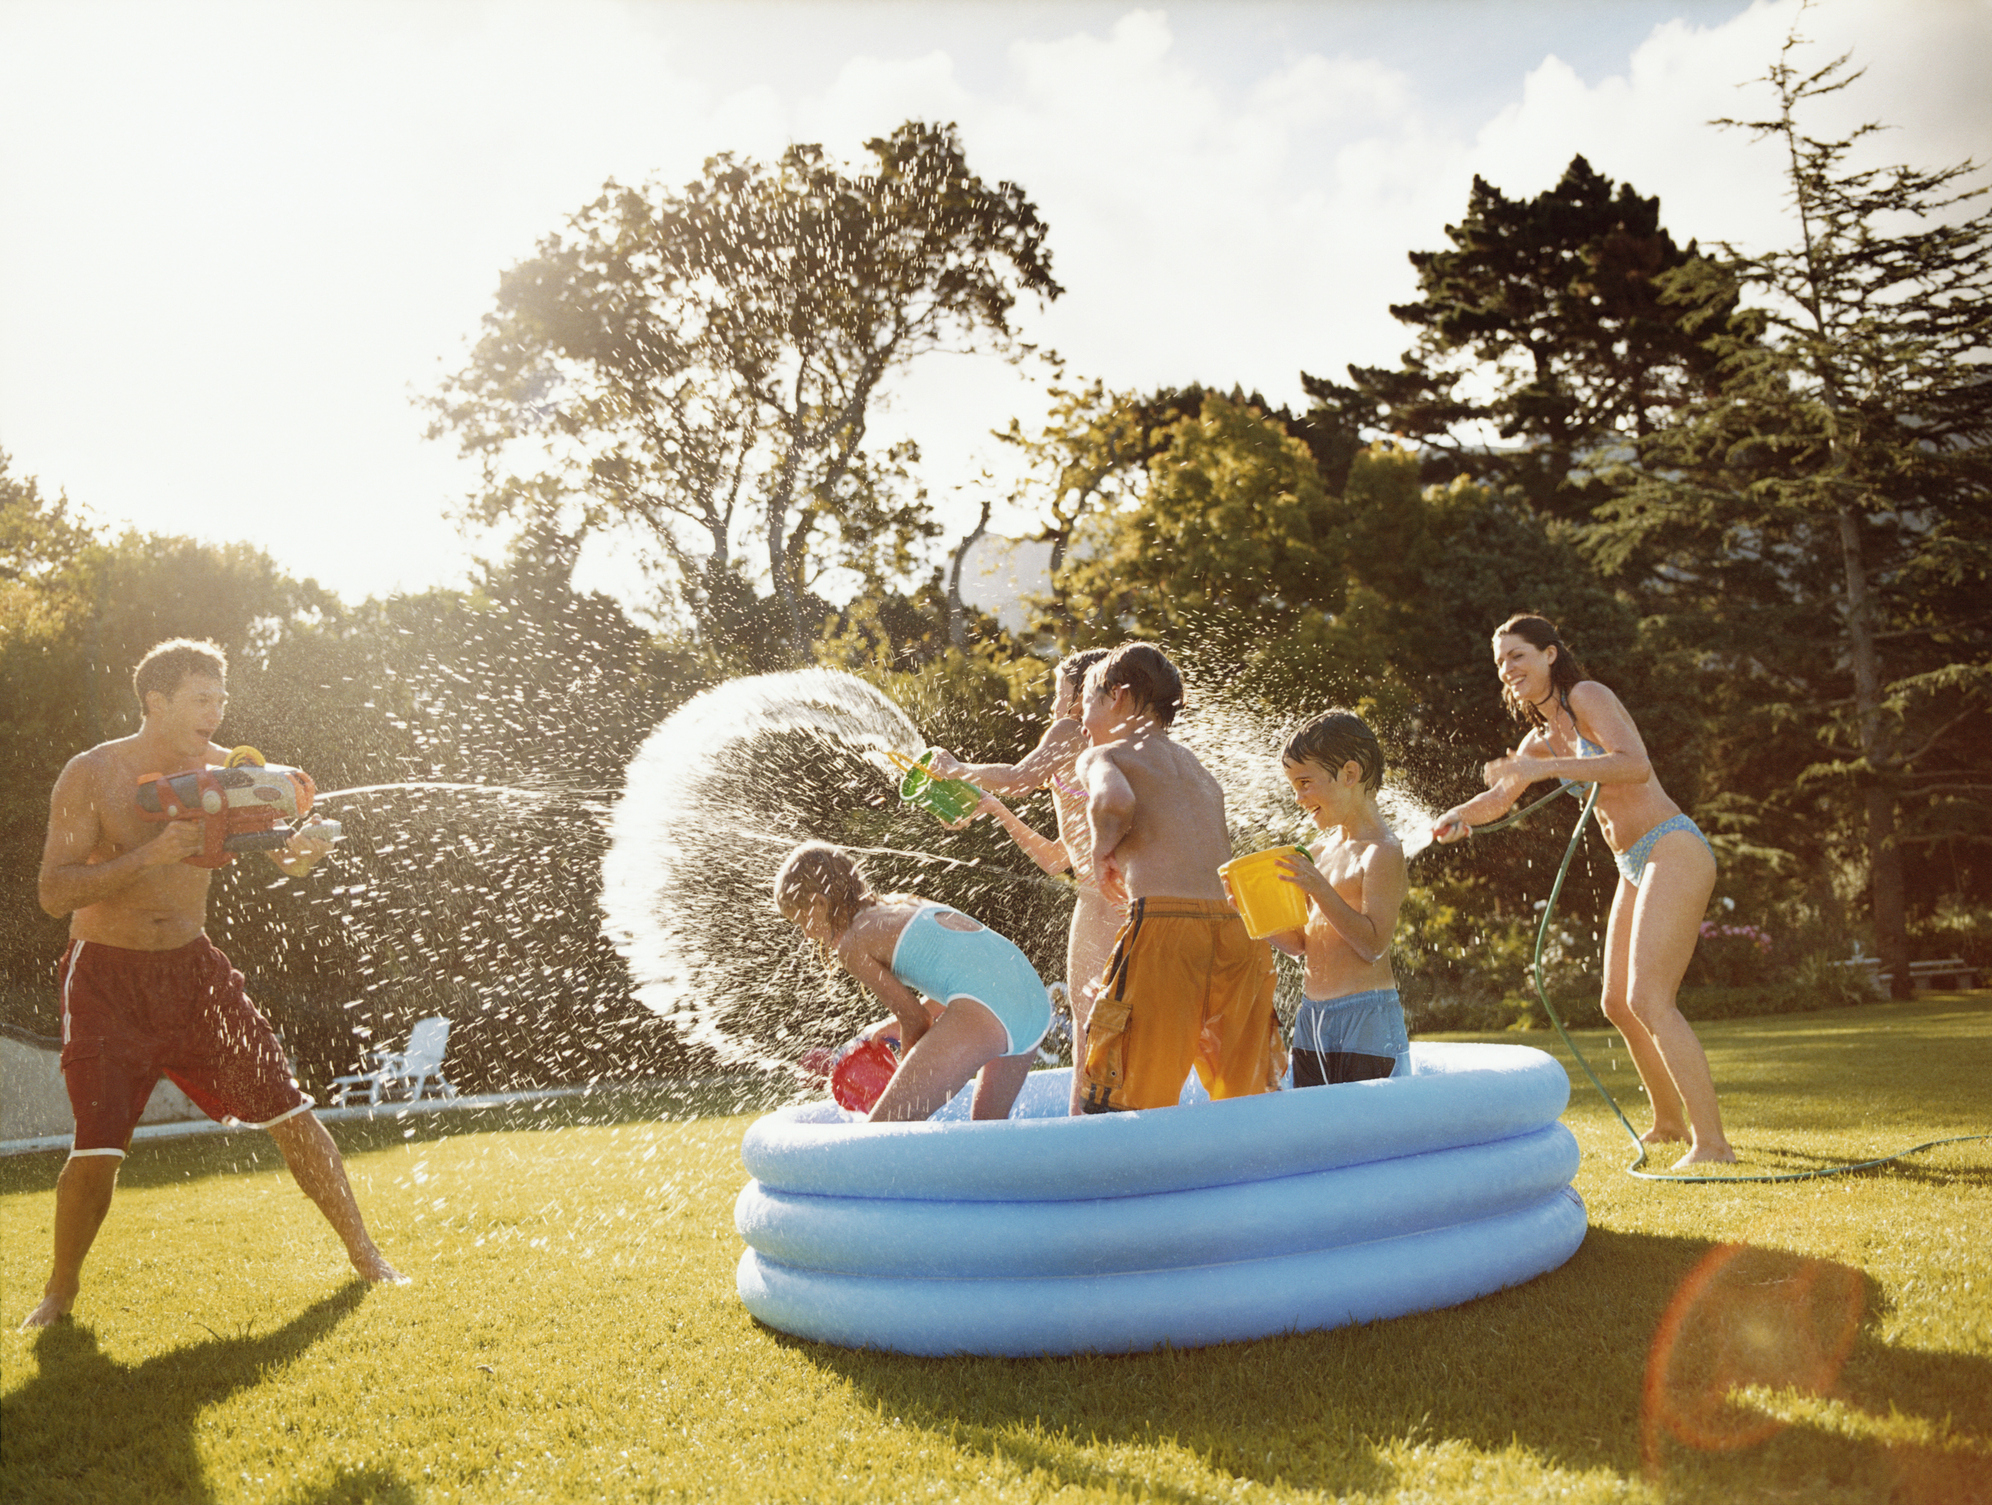 6 Tips To Kick Off A Safe & Healthy Summer